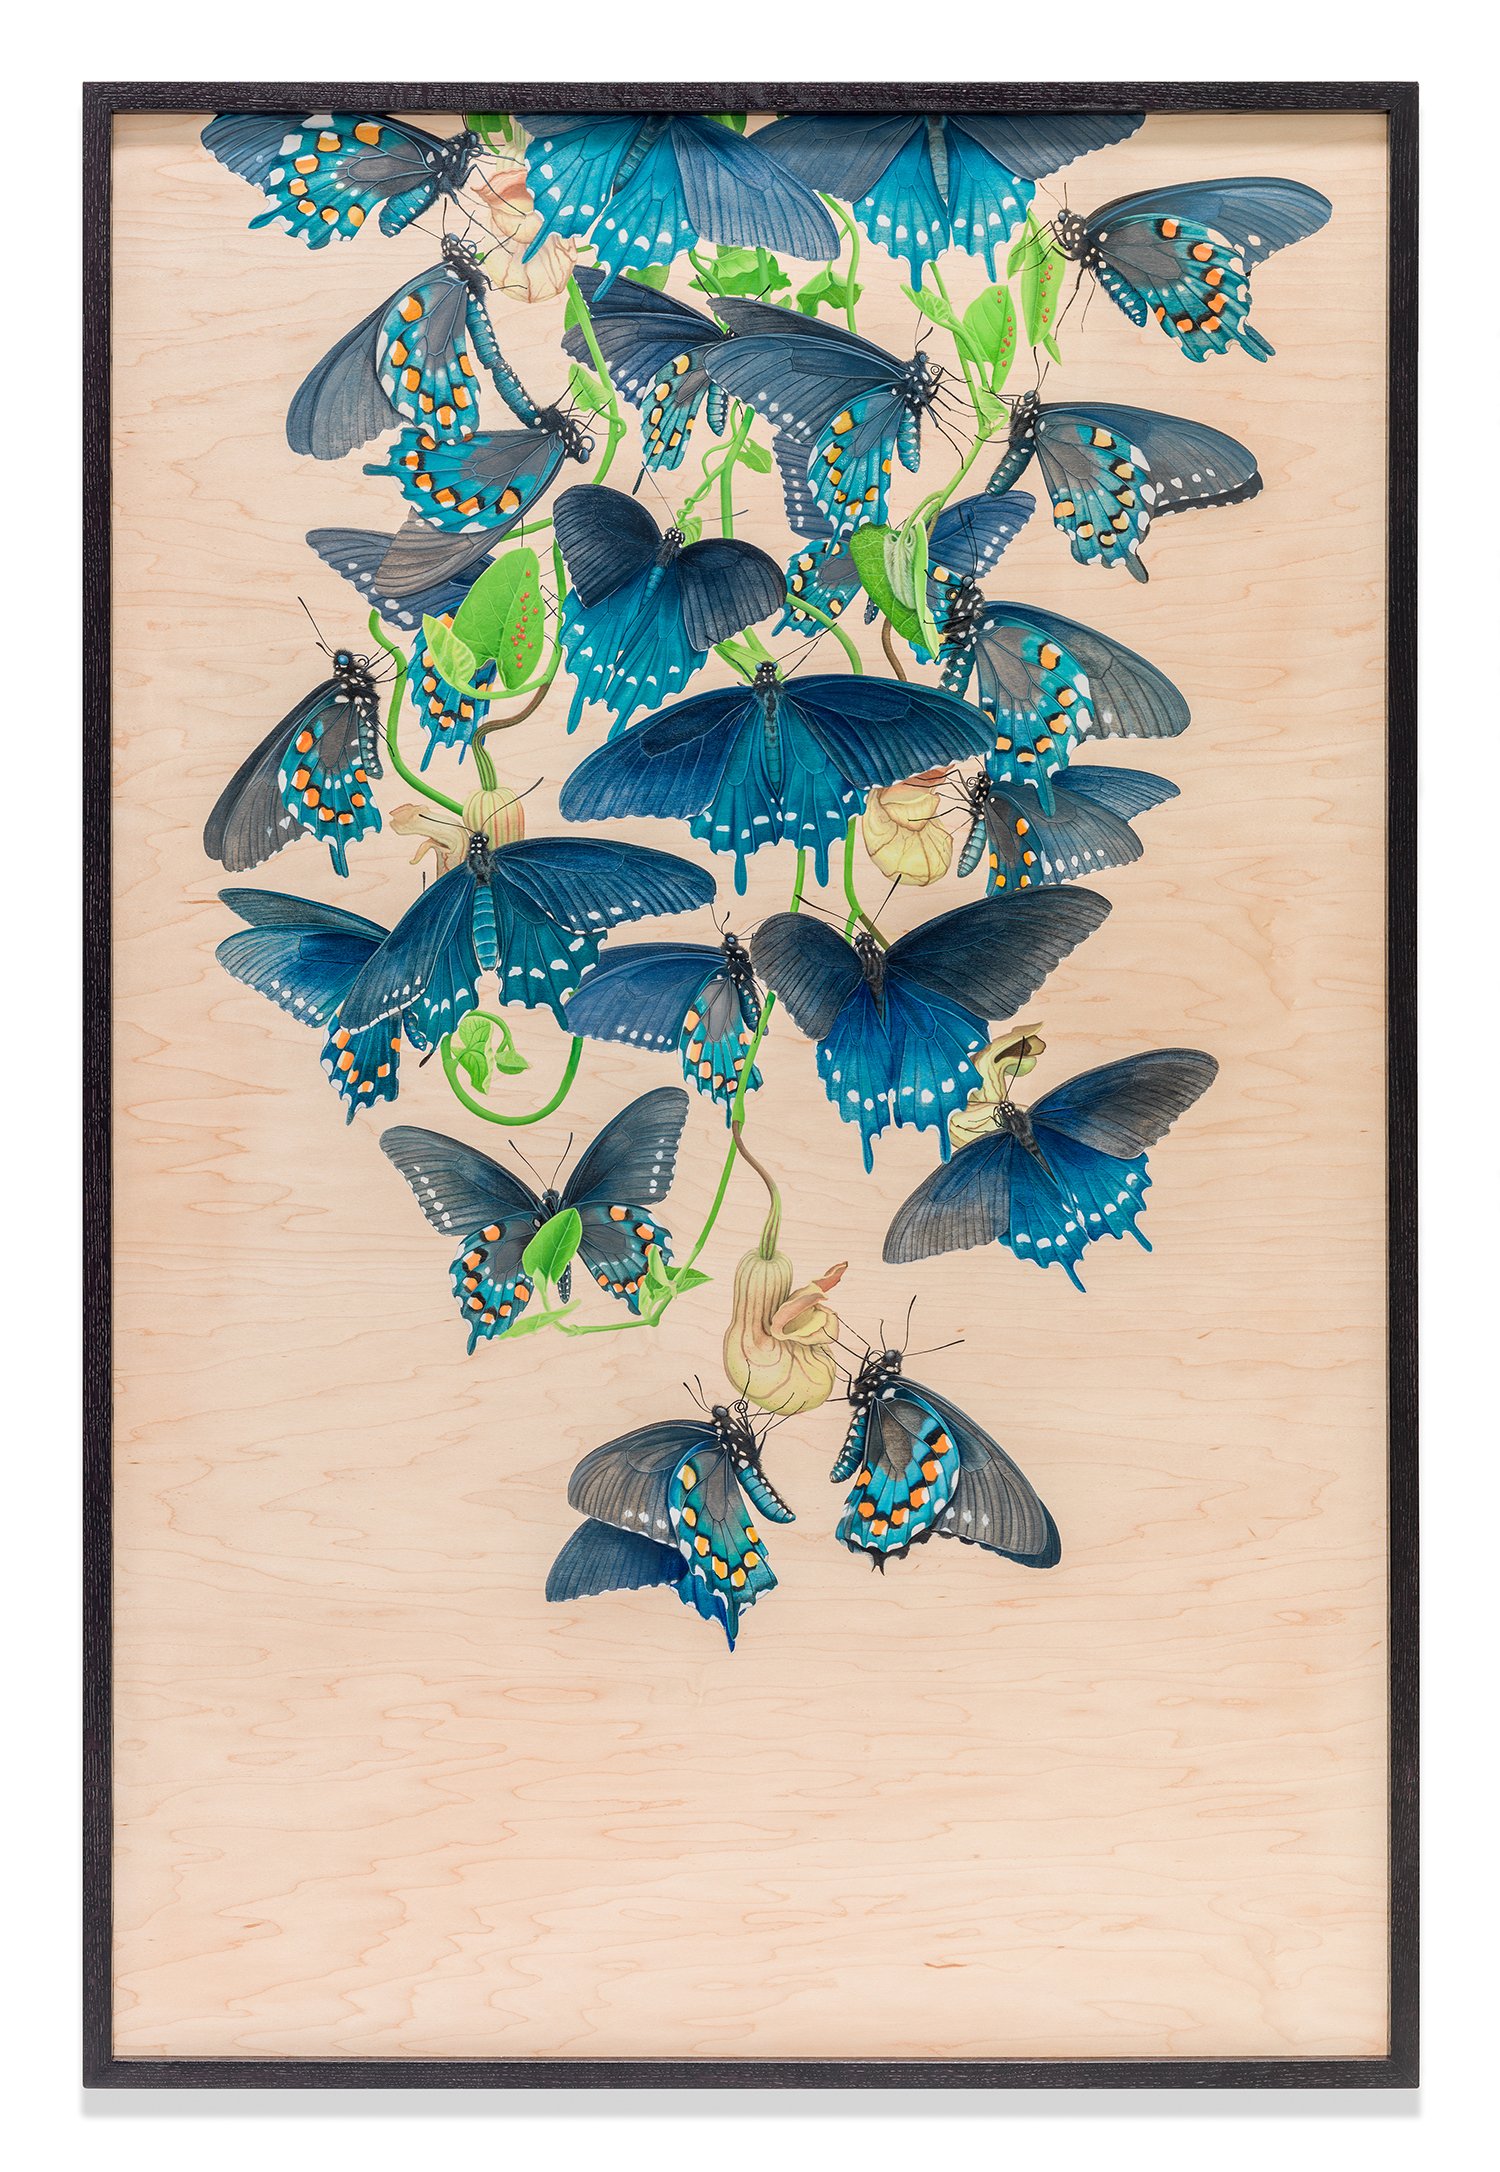 California Pipevine Swallowtail Butterflies, 48.5” x 29”, acrylic on maple panel, 2017